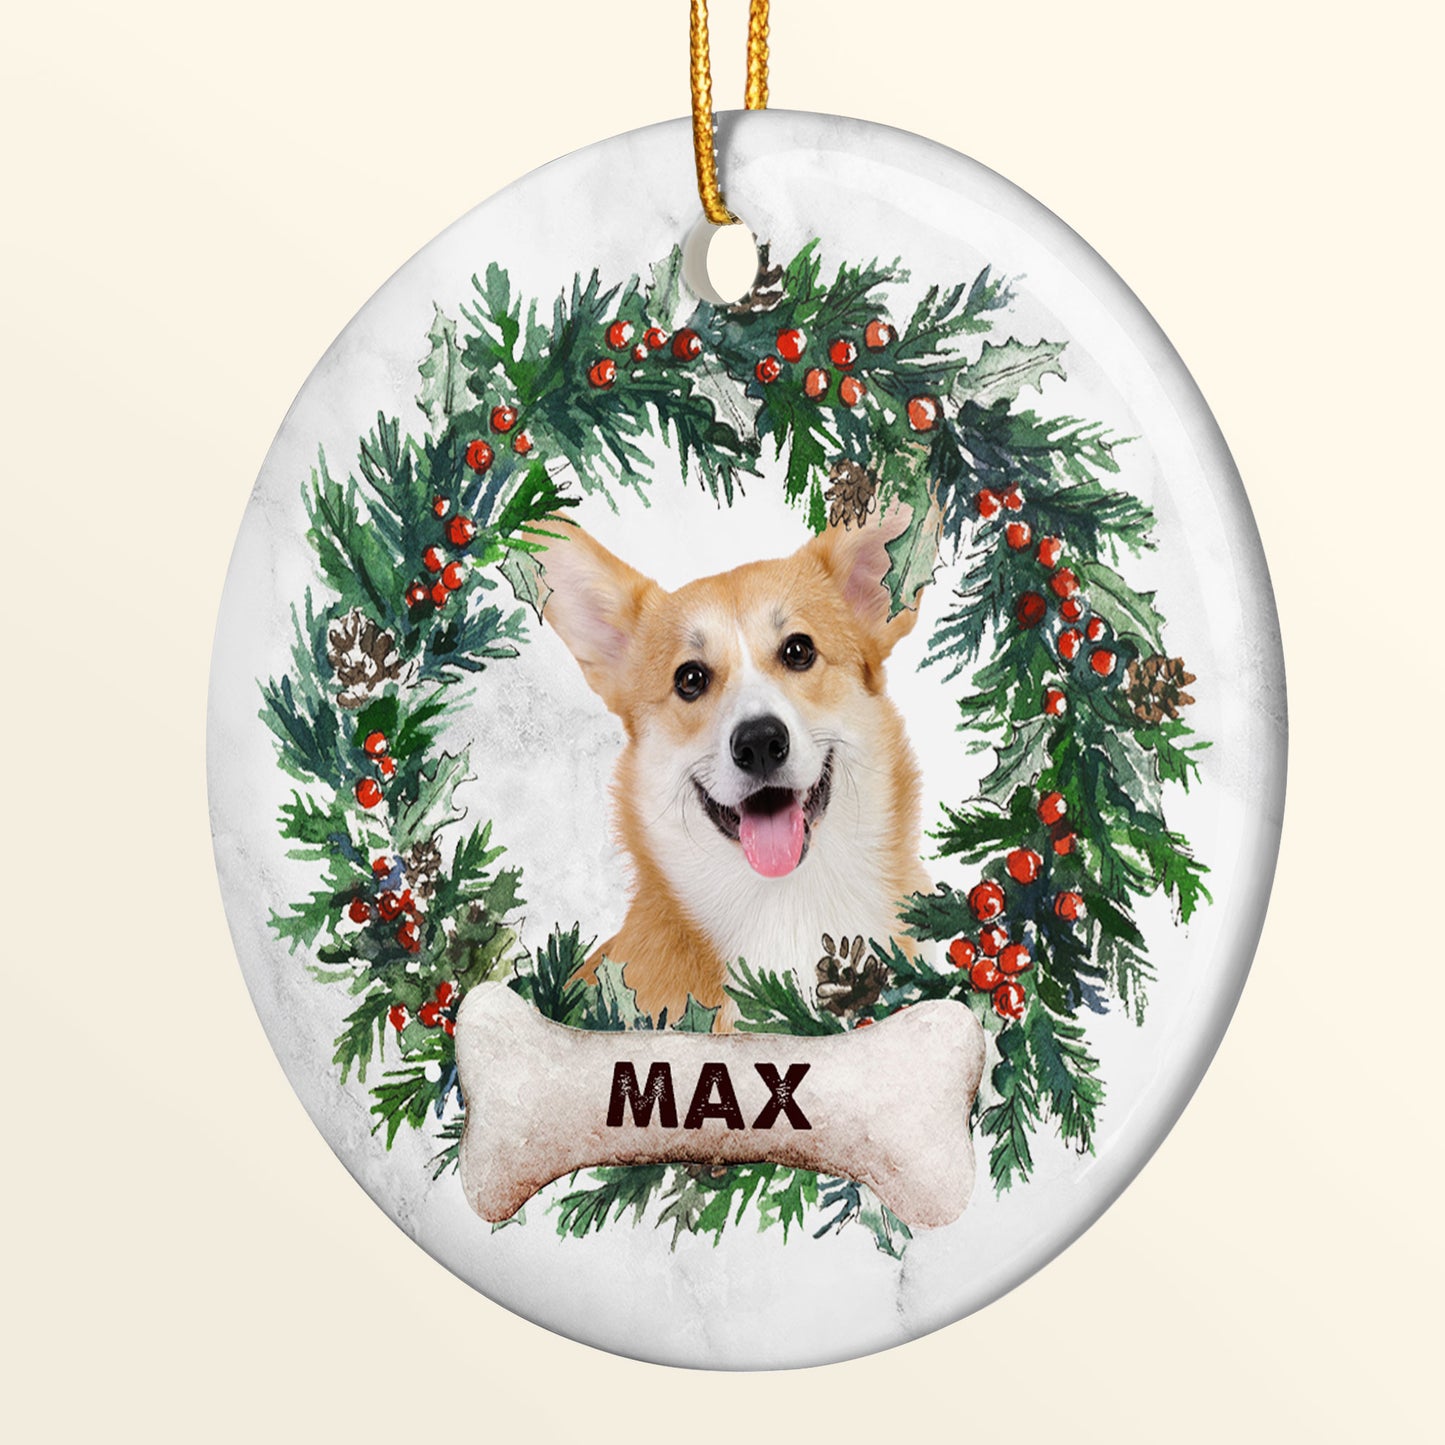 Lovely Pet - Personalized Ceramic Ornament - Christmas Gift For Dog Lovers, Cat Lovers